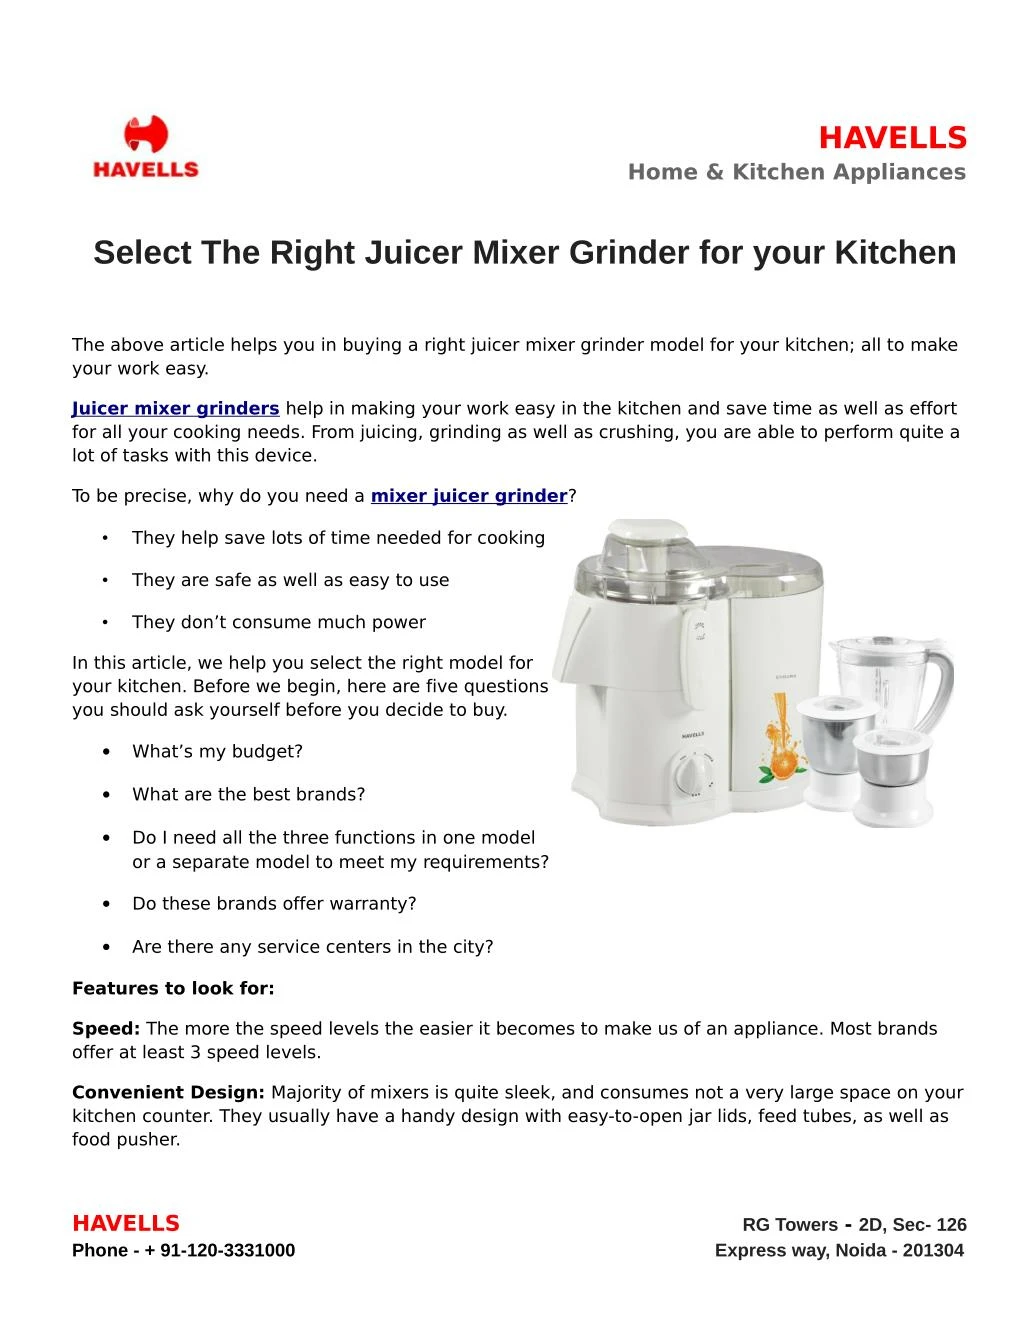 How to select the right mixer grinder